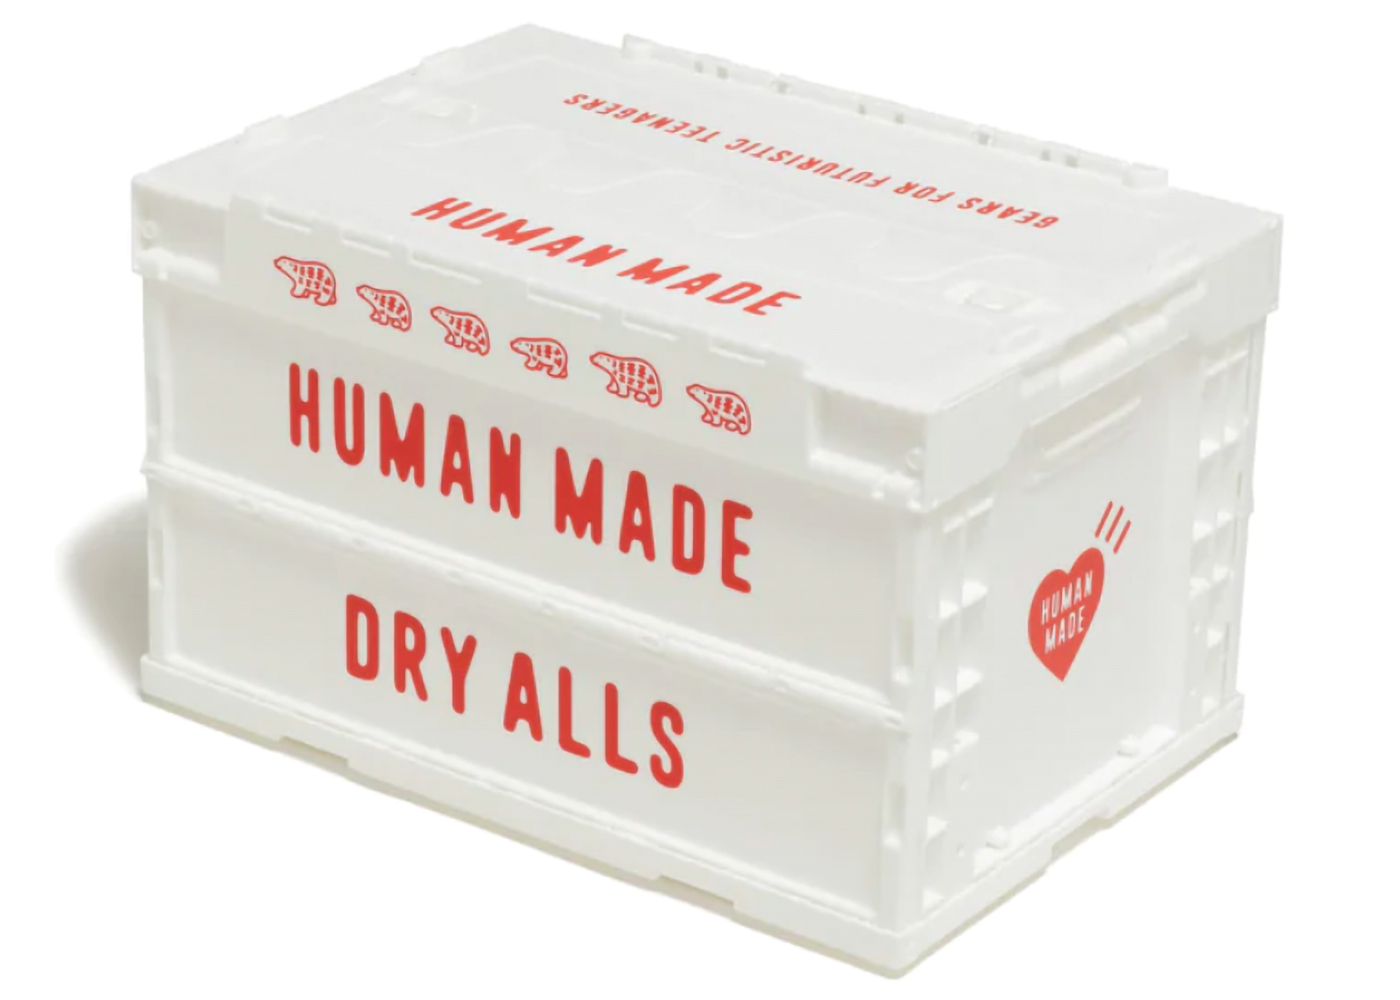 Human Made 50L Container White